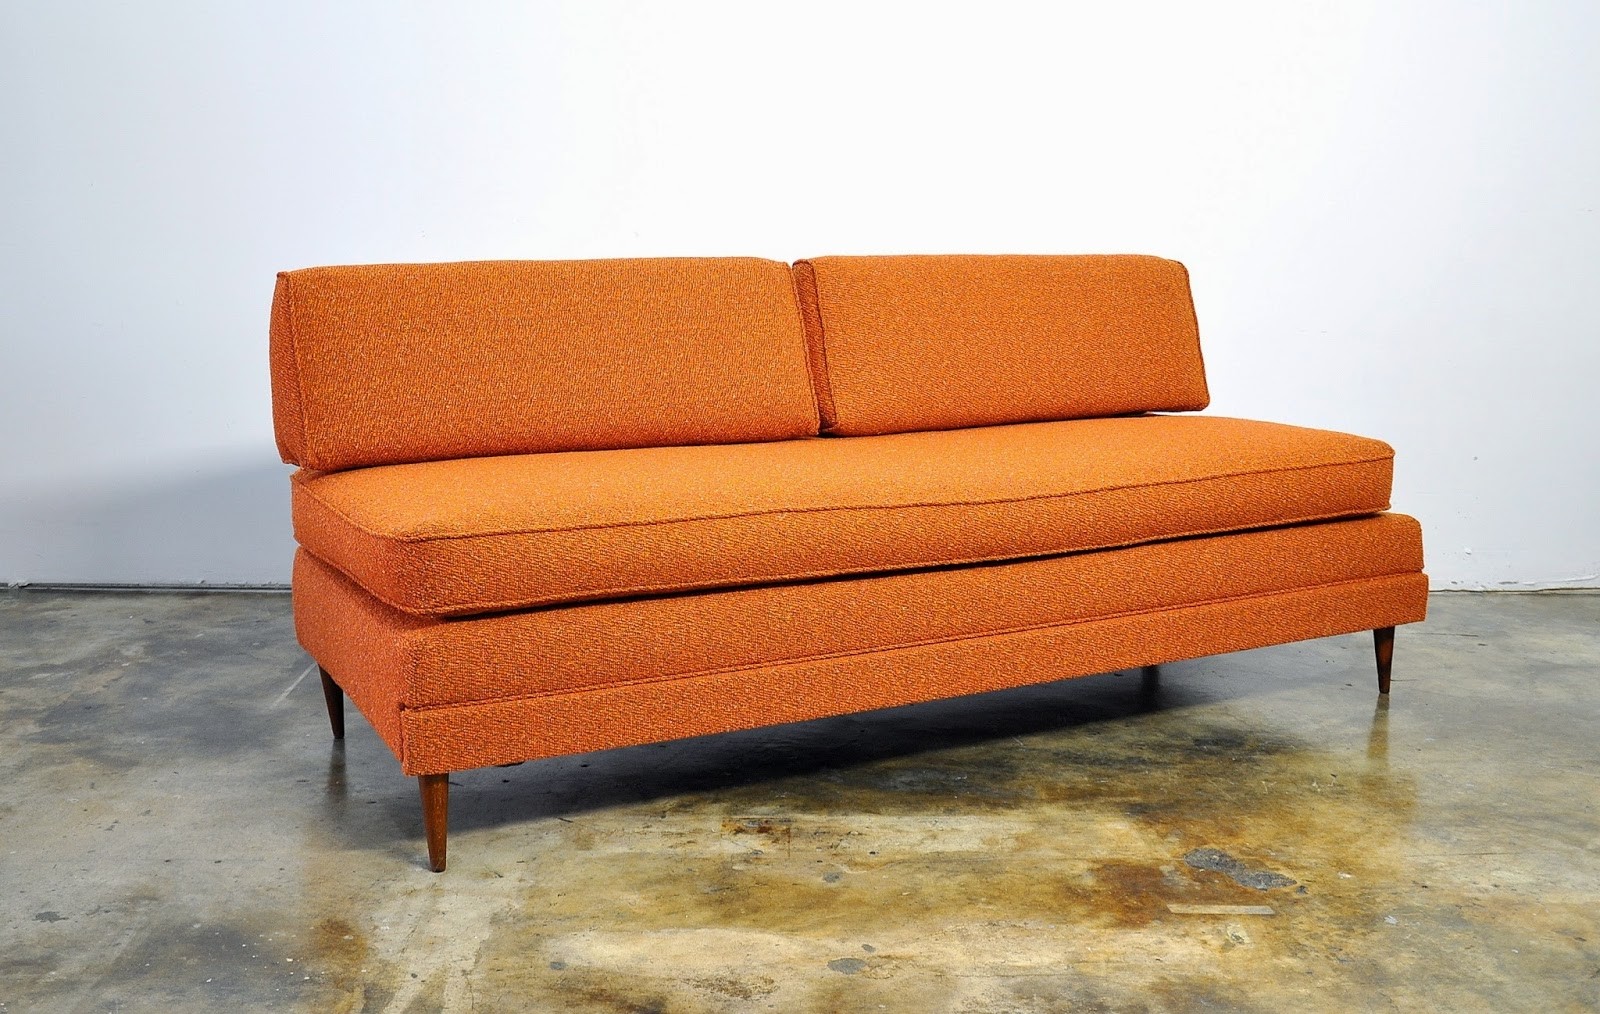 Danish modern sofa or daybed with trundle pull out bed